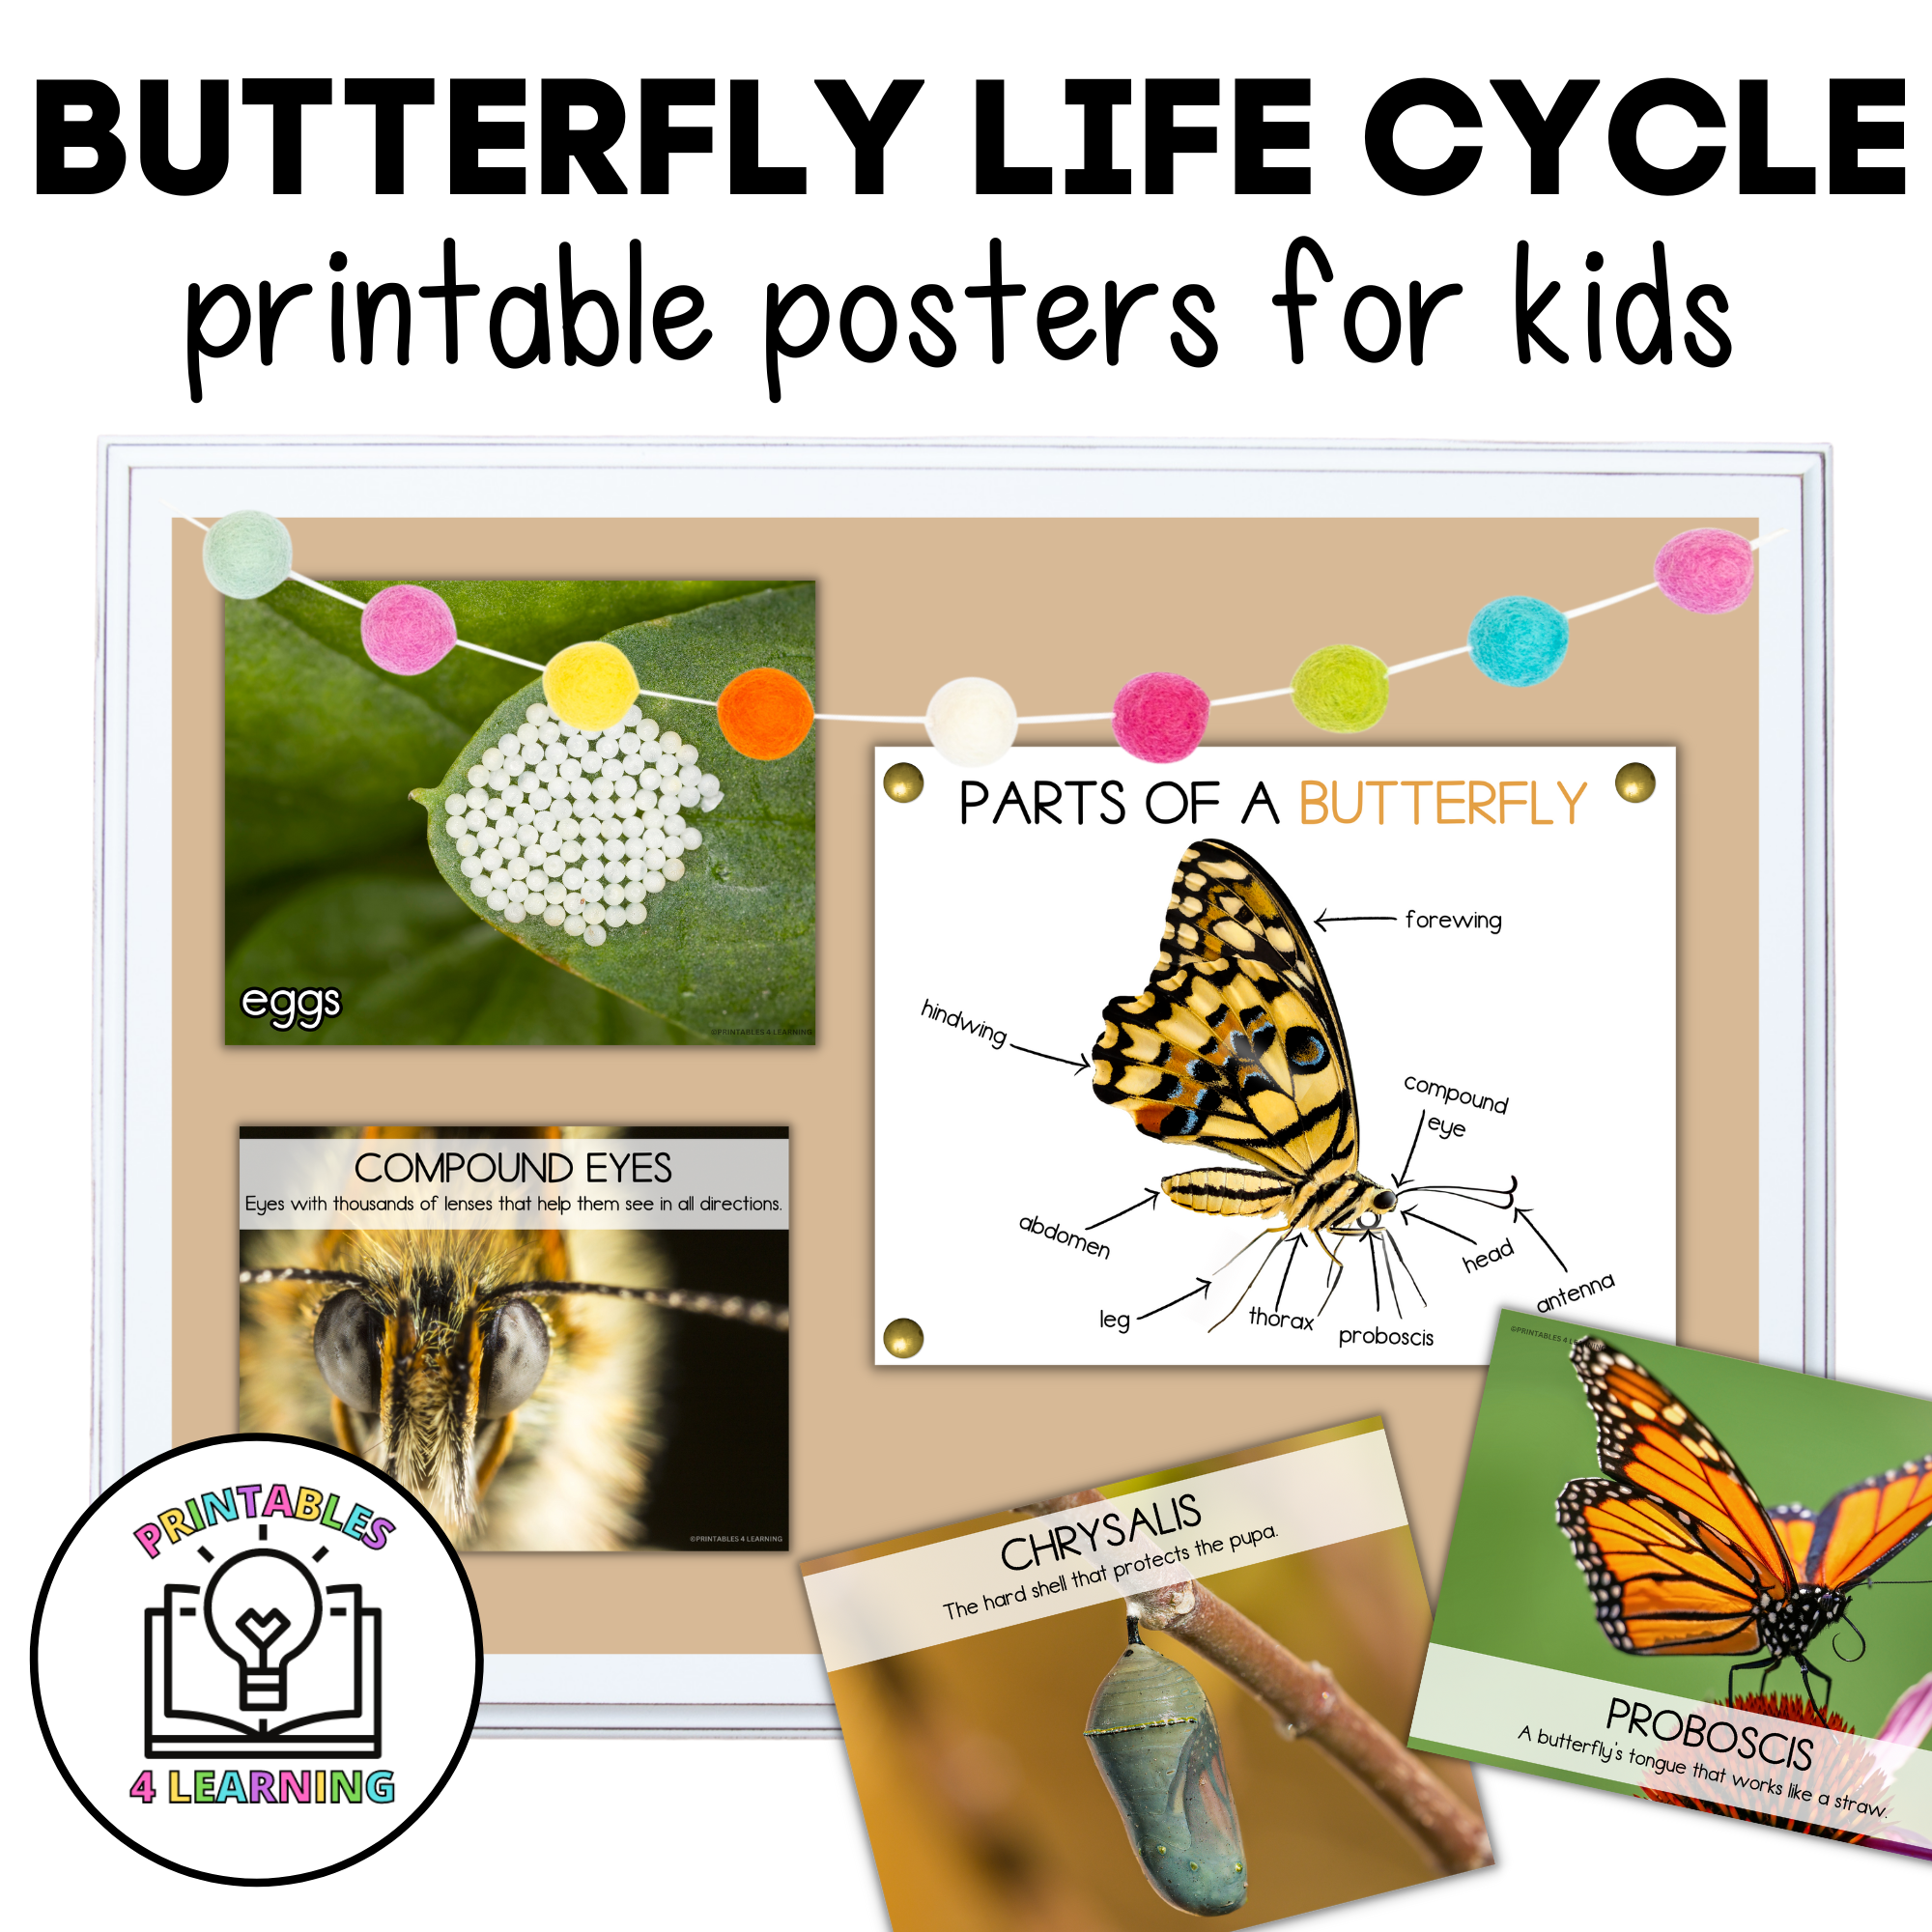 Life Cycle of a Butterfly Playdough Mat - Free Printable - Views